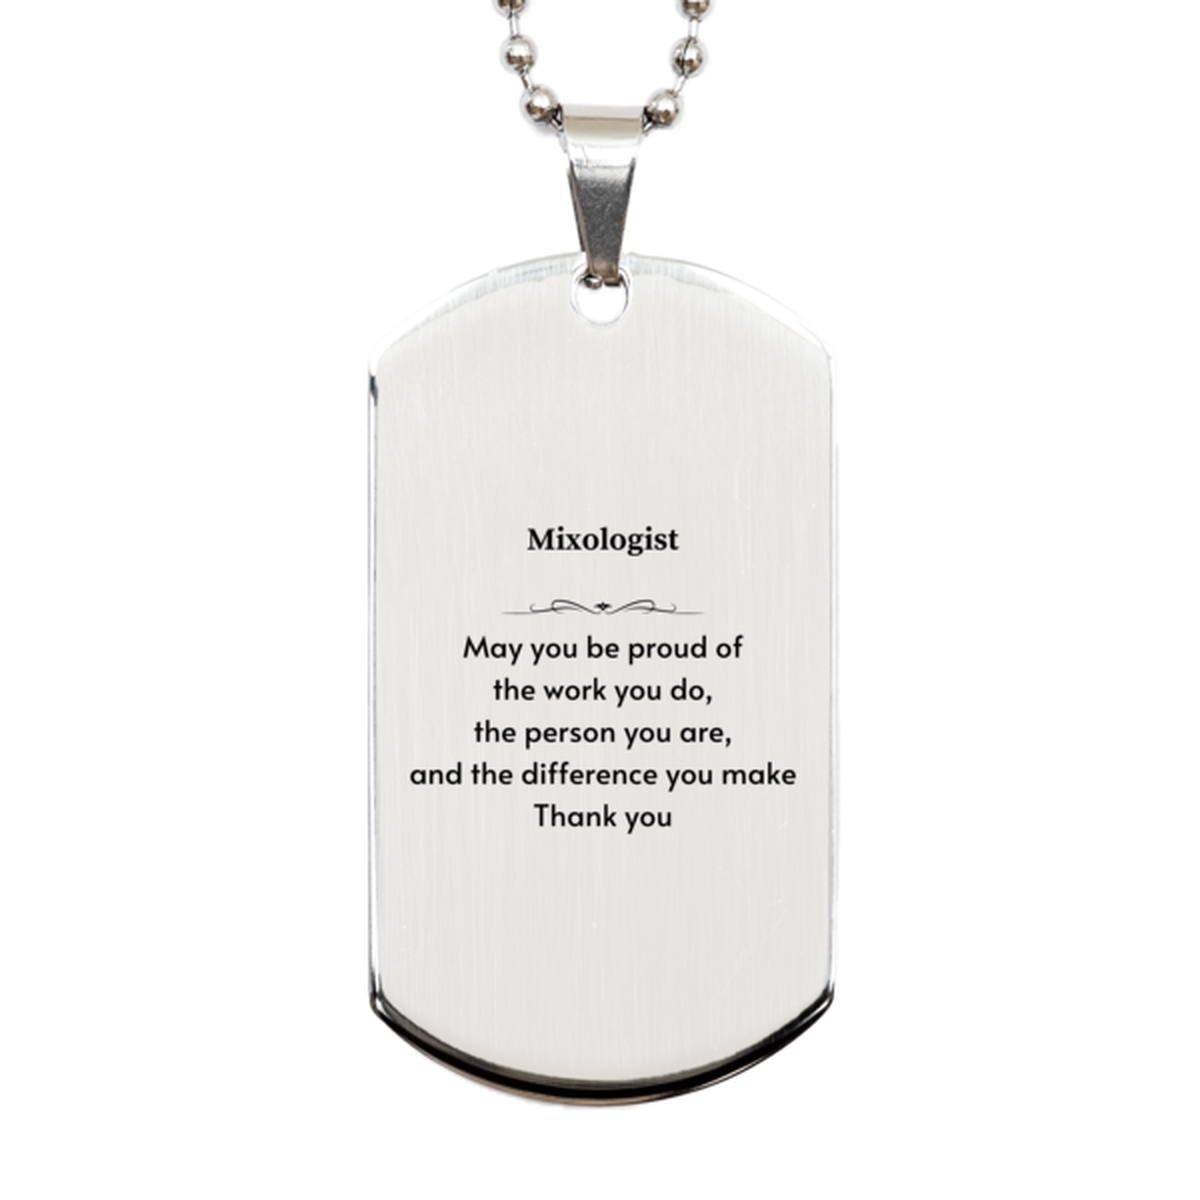 Heartwarming Silver Dog Tag Retirement Coworkers Gifts for Mixologist, Mixologist May You be proud of the work you do, the person you are Gifts for Boss Men Women Friends